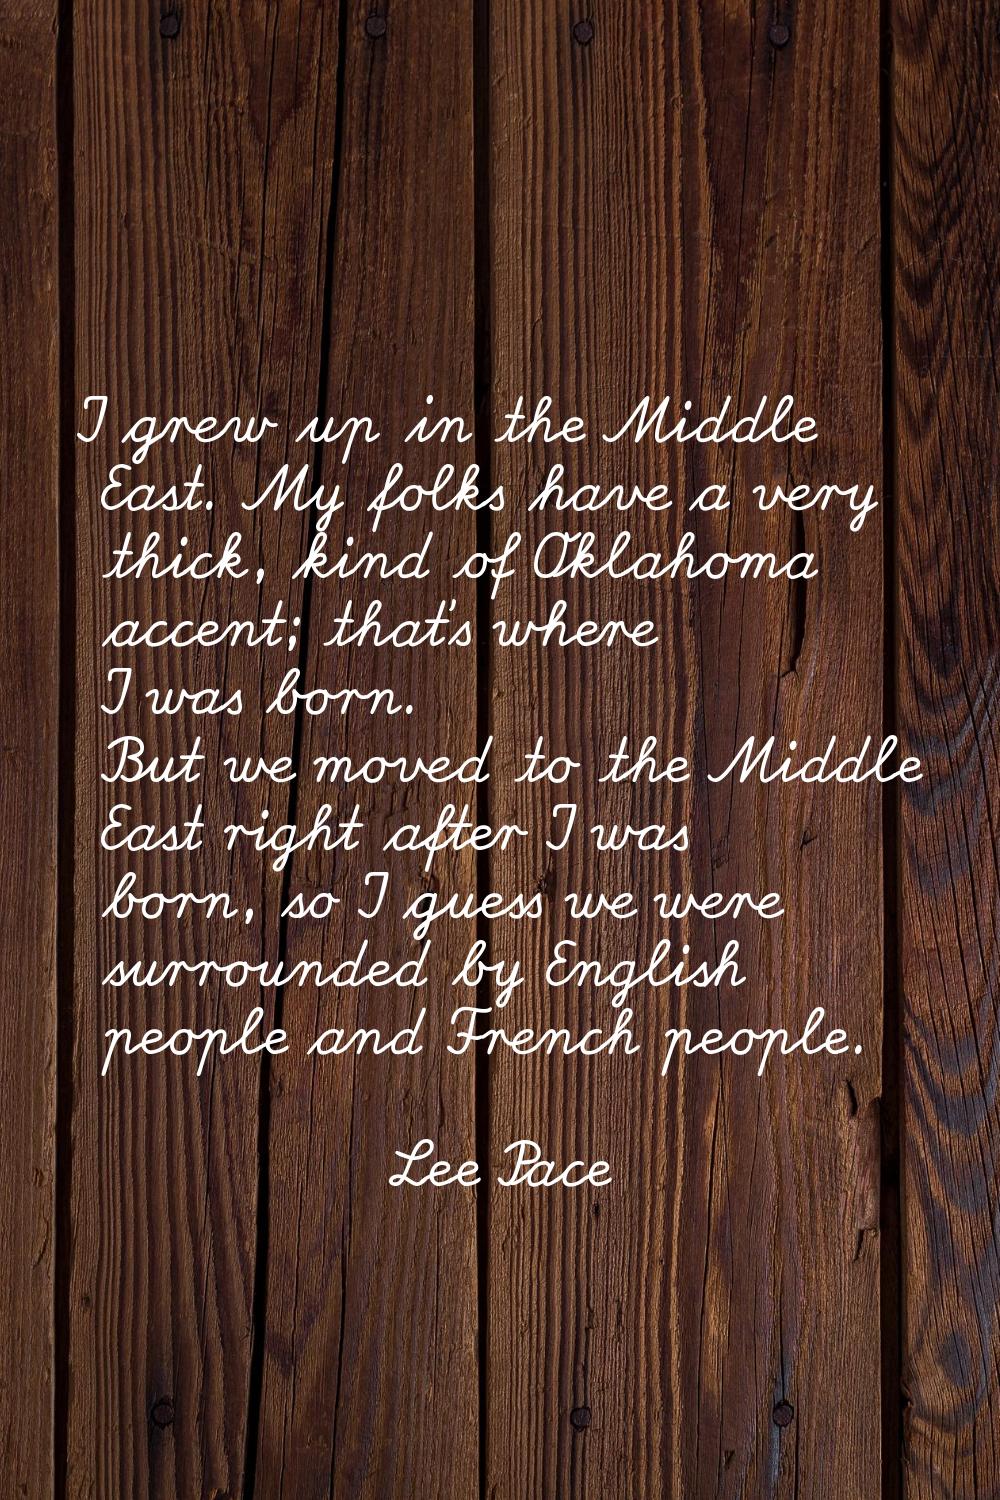 I grew up in the Middle East. My folks have a very thick, kind of Oklahoma accent; that's where I w